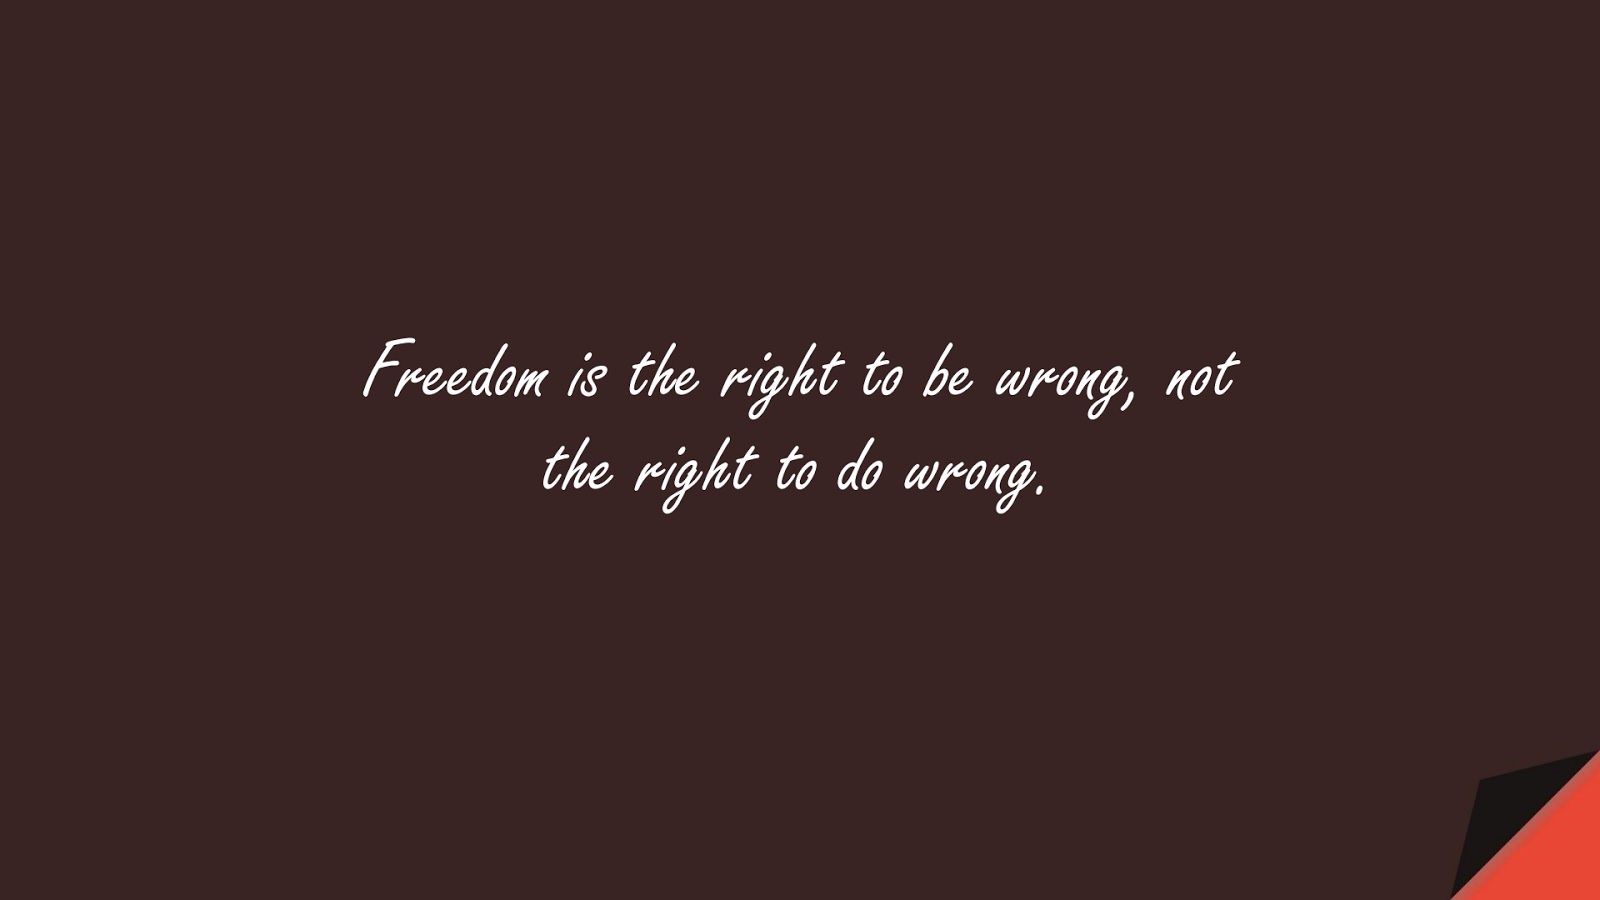 Freedom is the right to be wrong, not the right to do wrong.FALSE